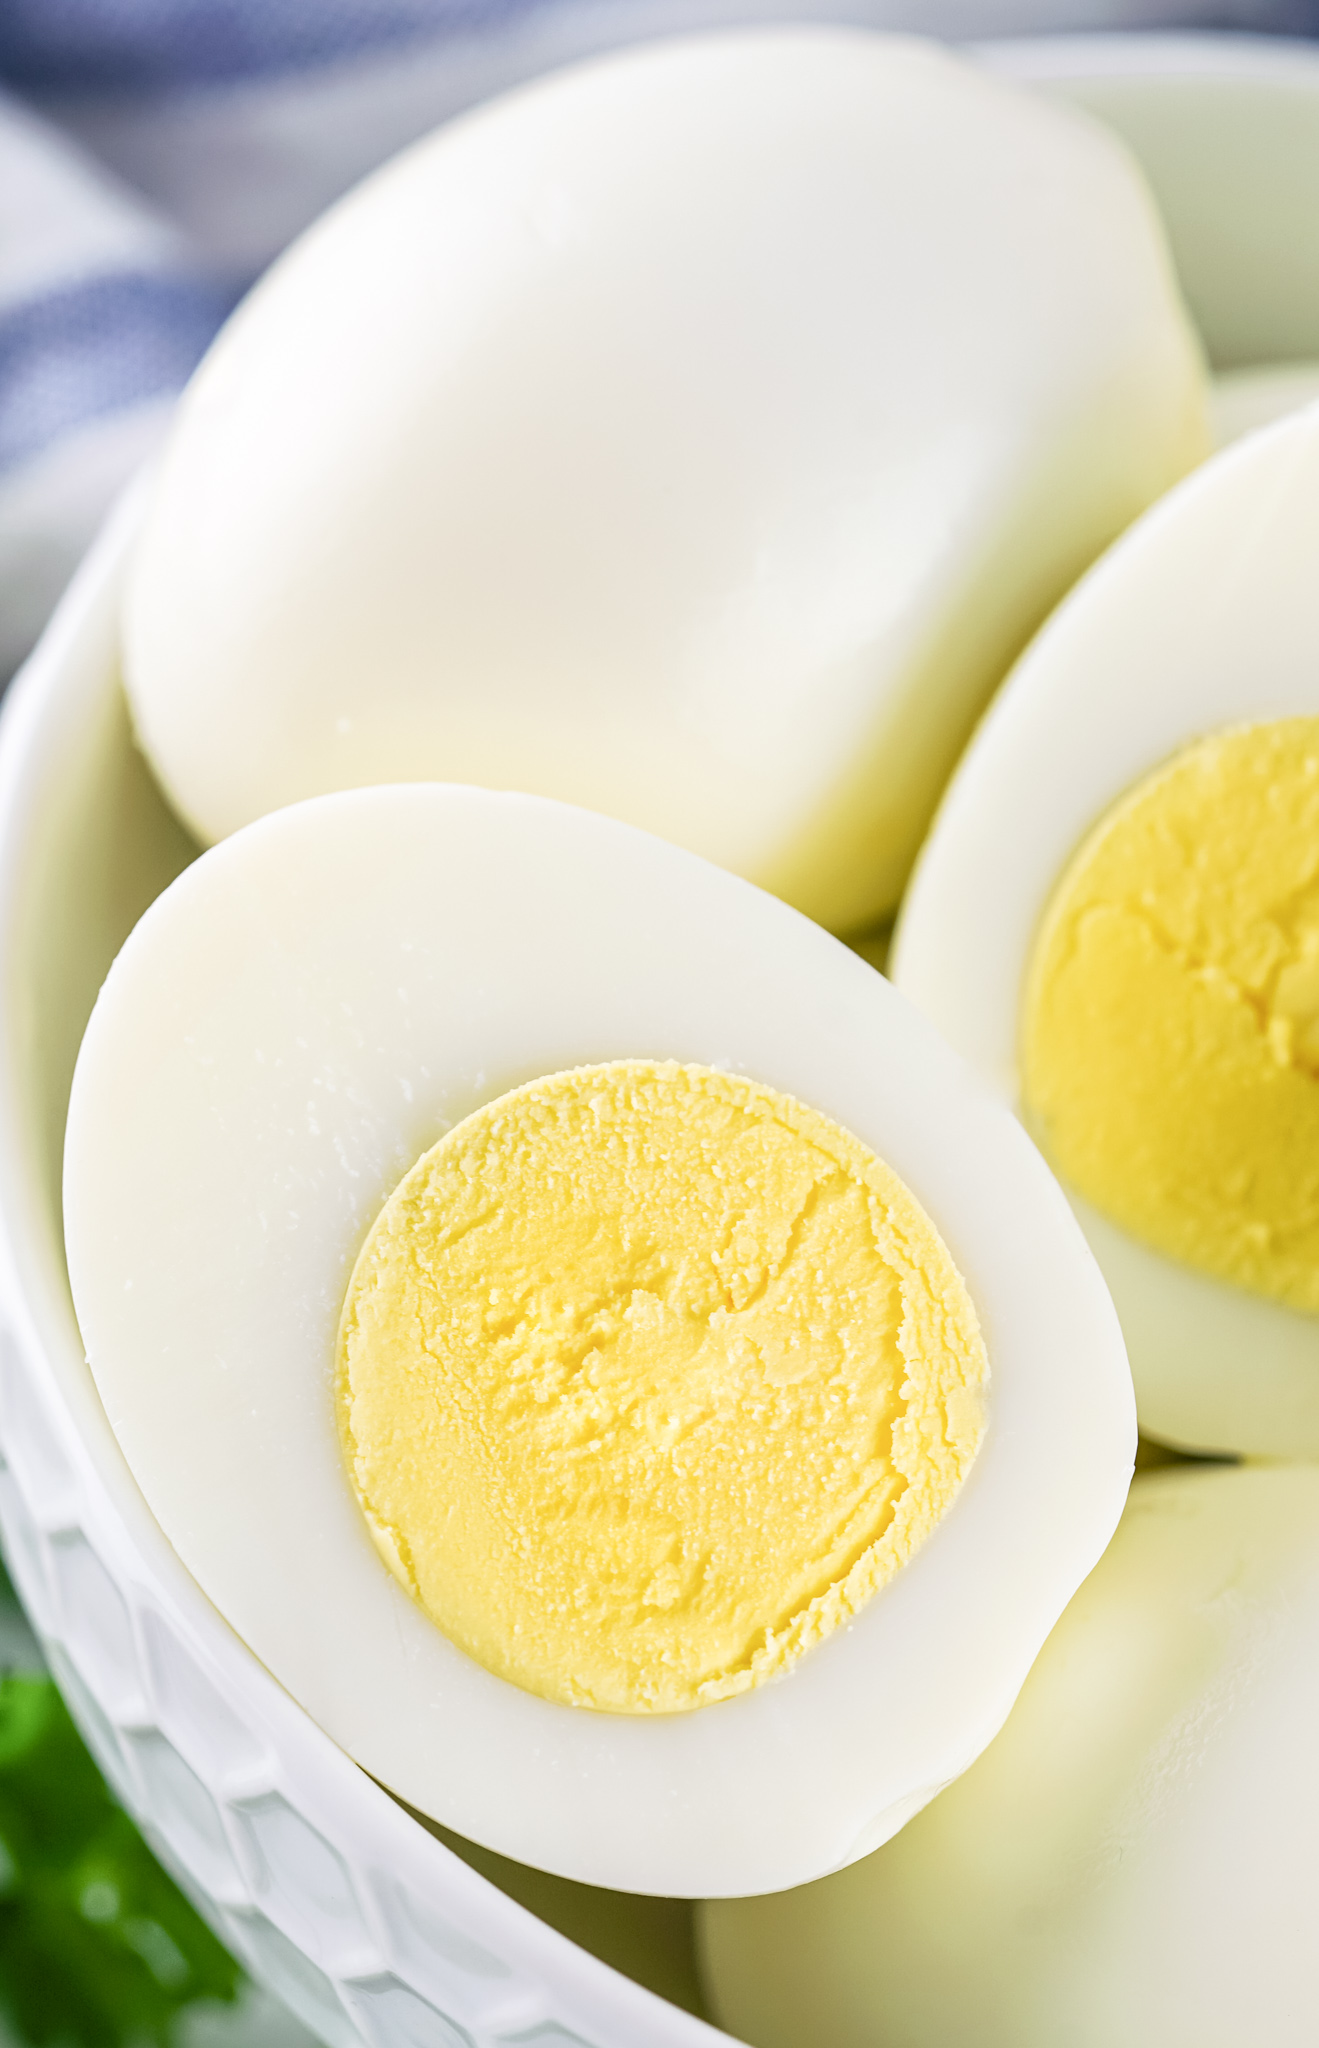 Perfectly Cooked Eggs – Instant Pot Recipes